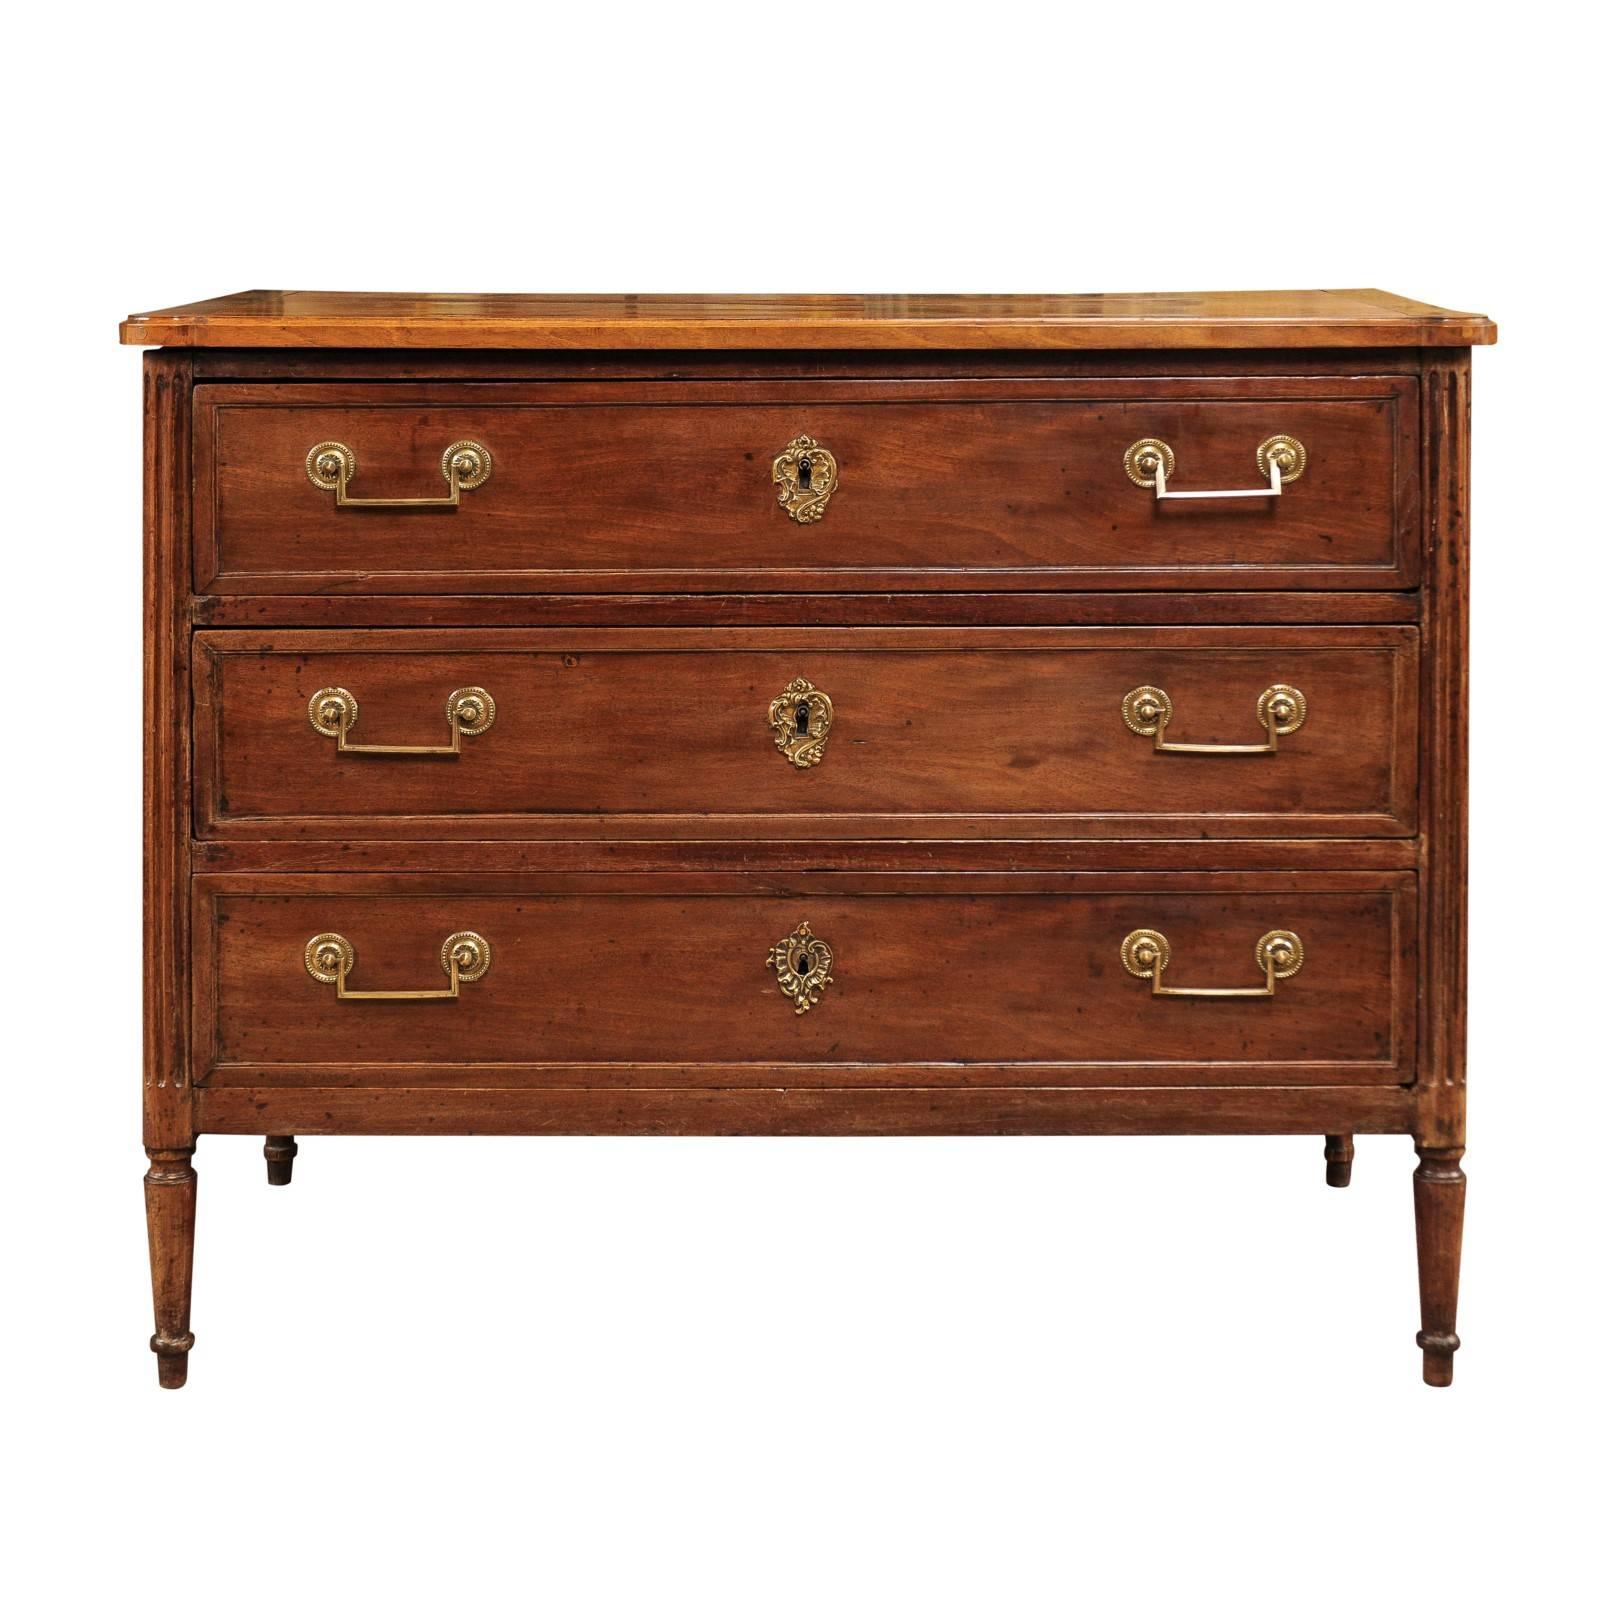 Late 18th Century French Louis XVI Walnut Commode